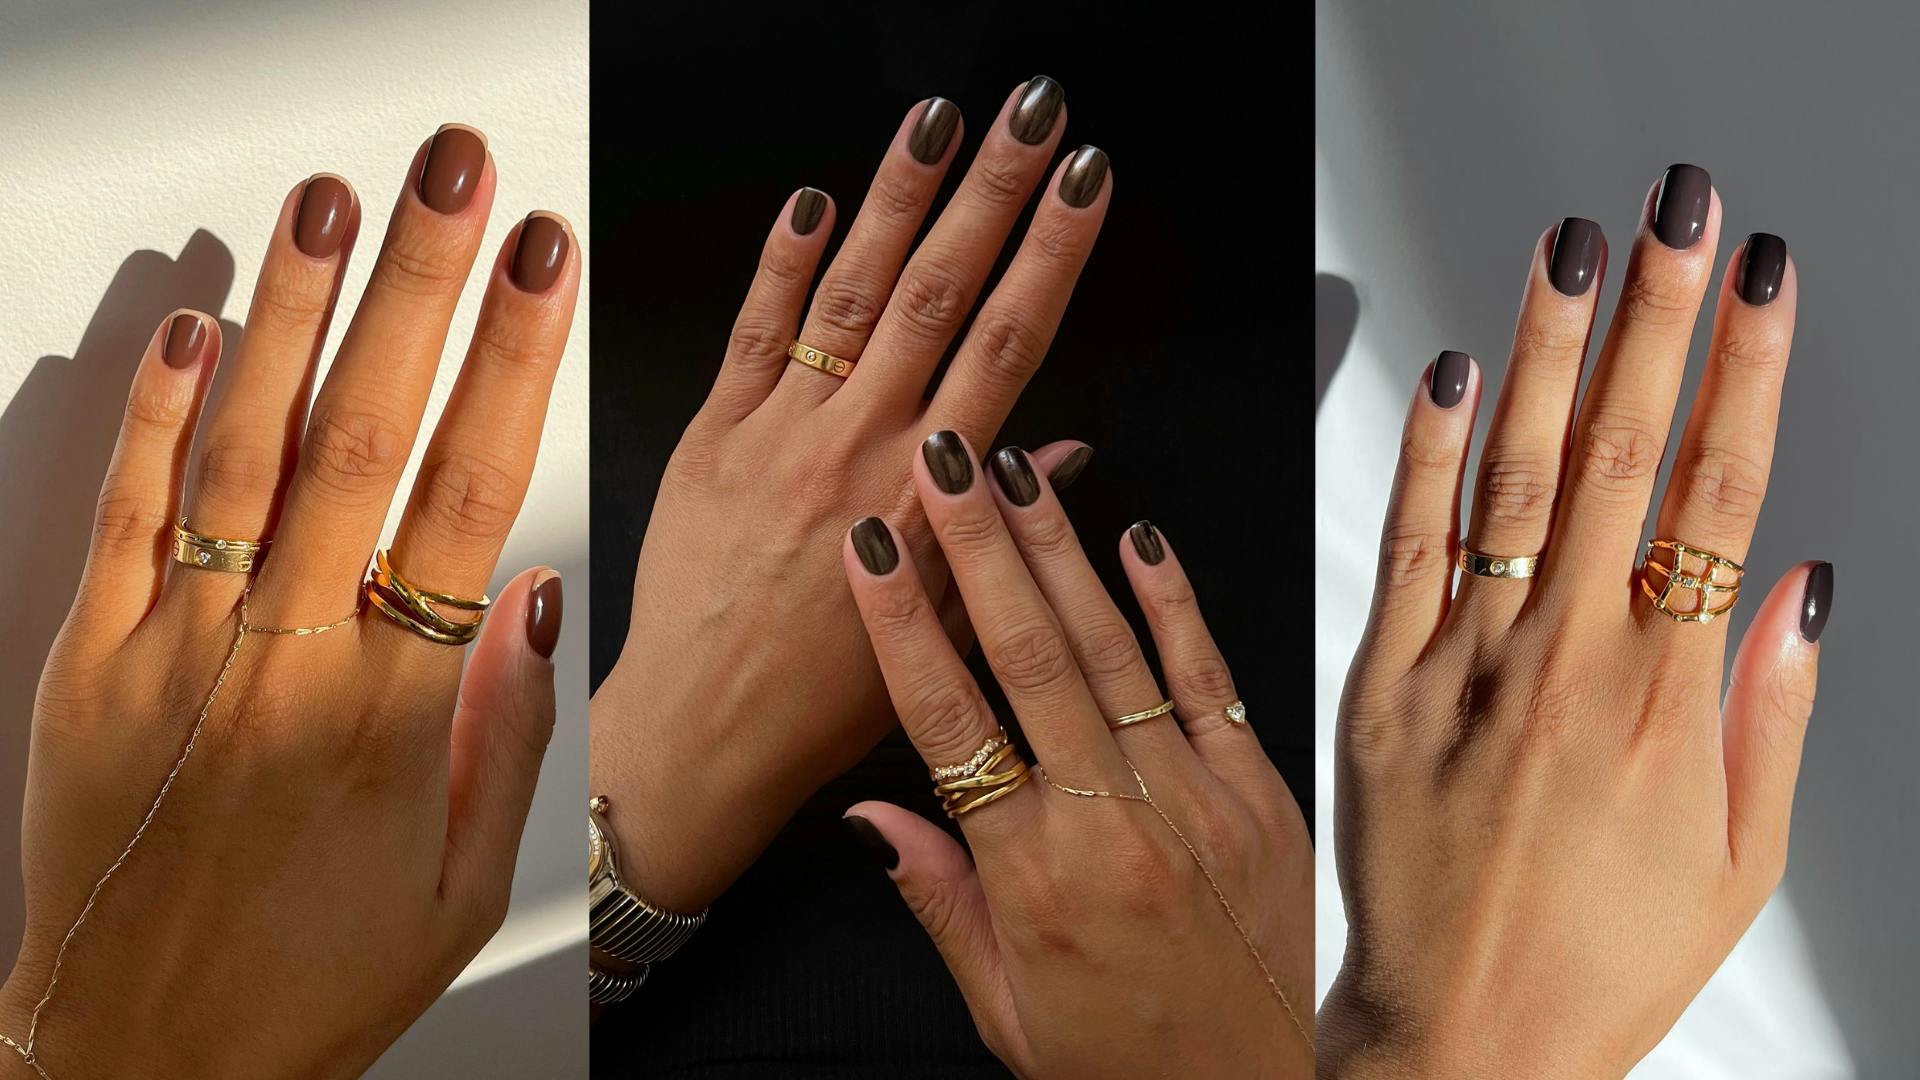 Coffin Winter Nails: 30 Popular Coffin-Nail Designs to Try This Season |  Glamour